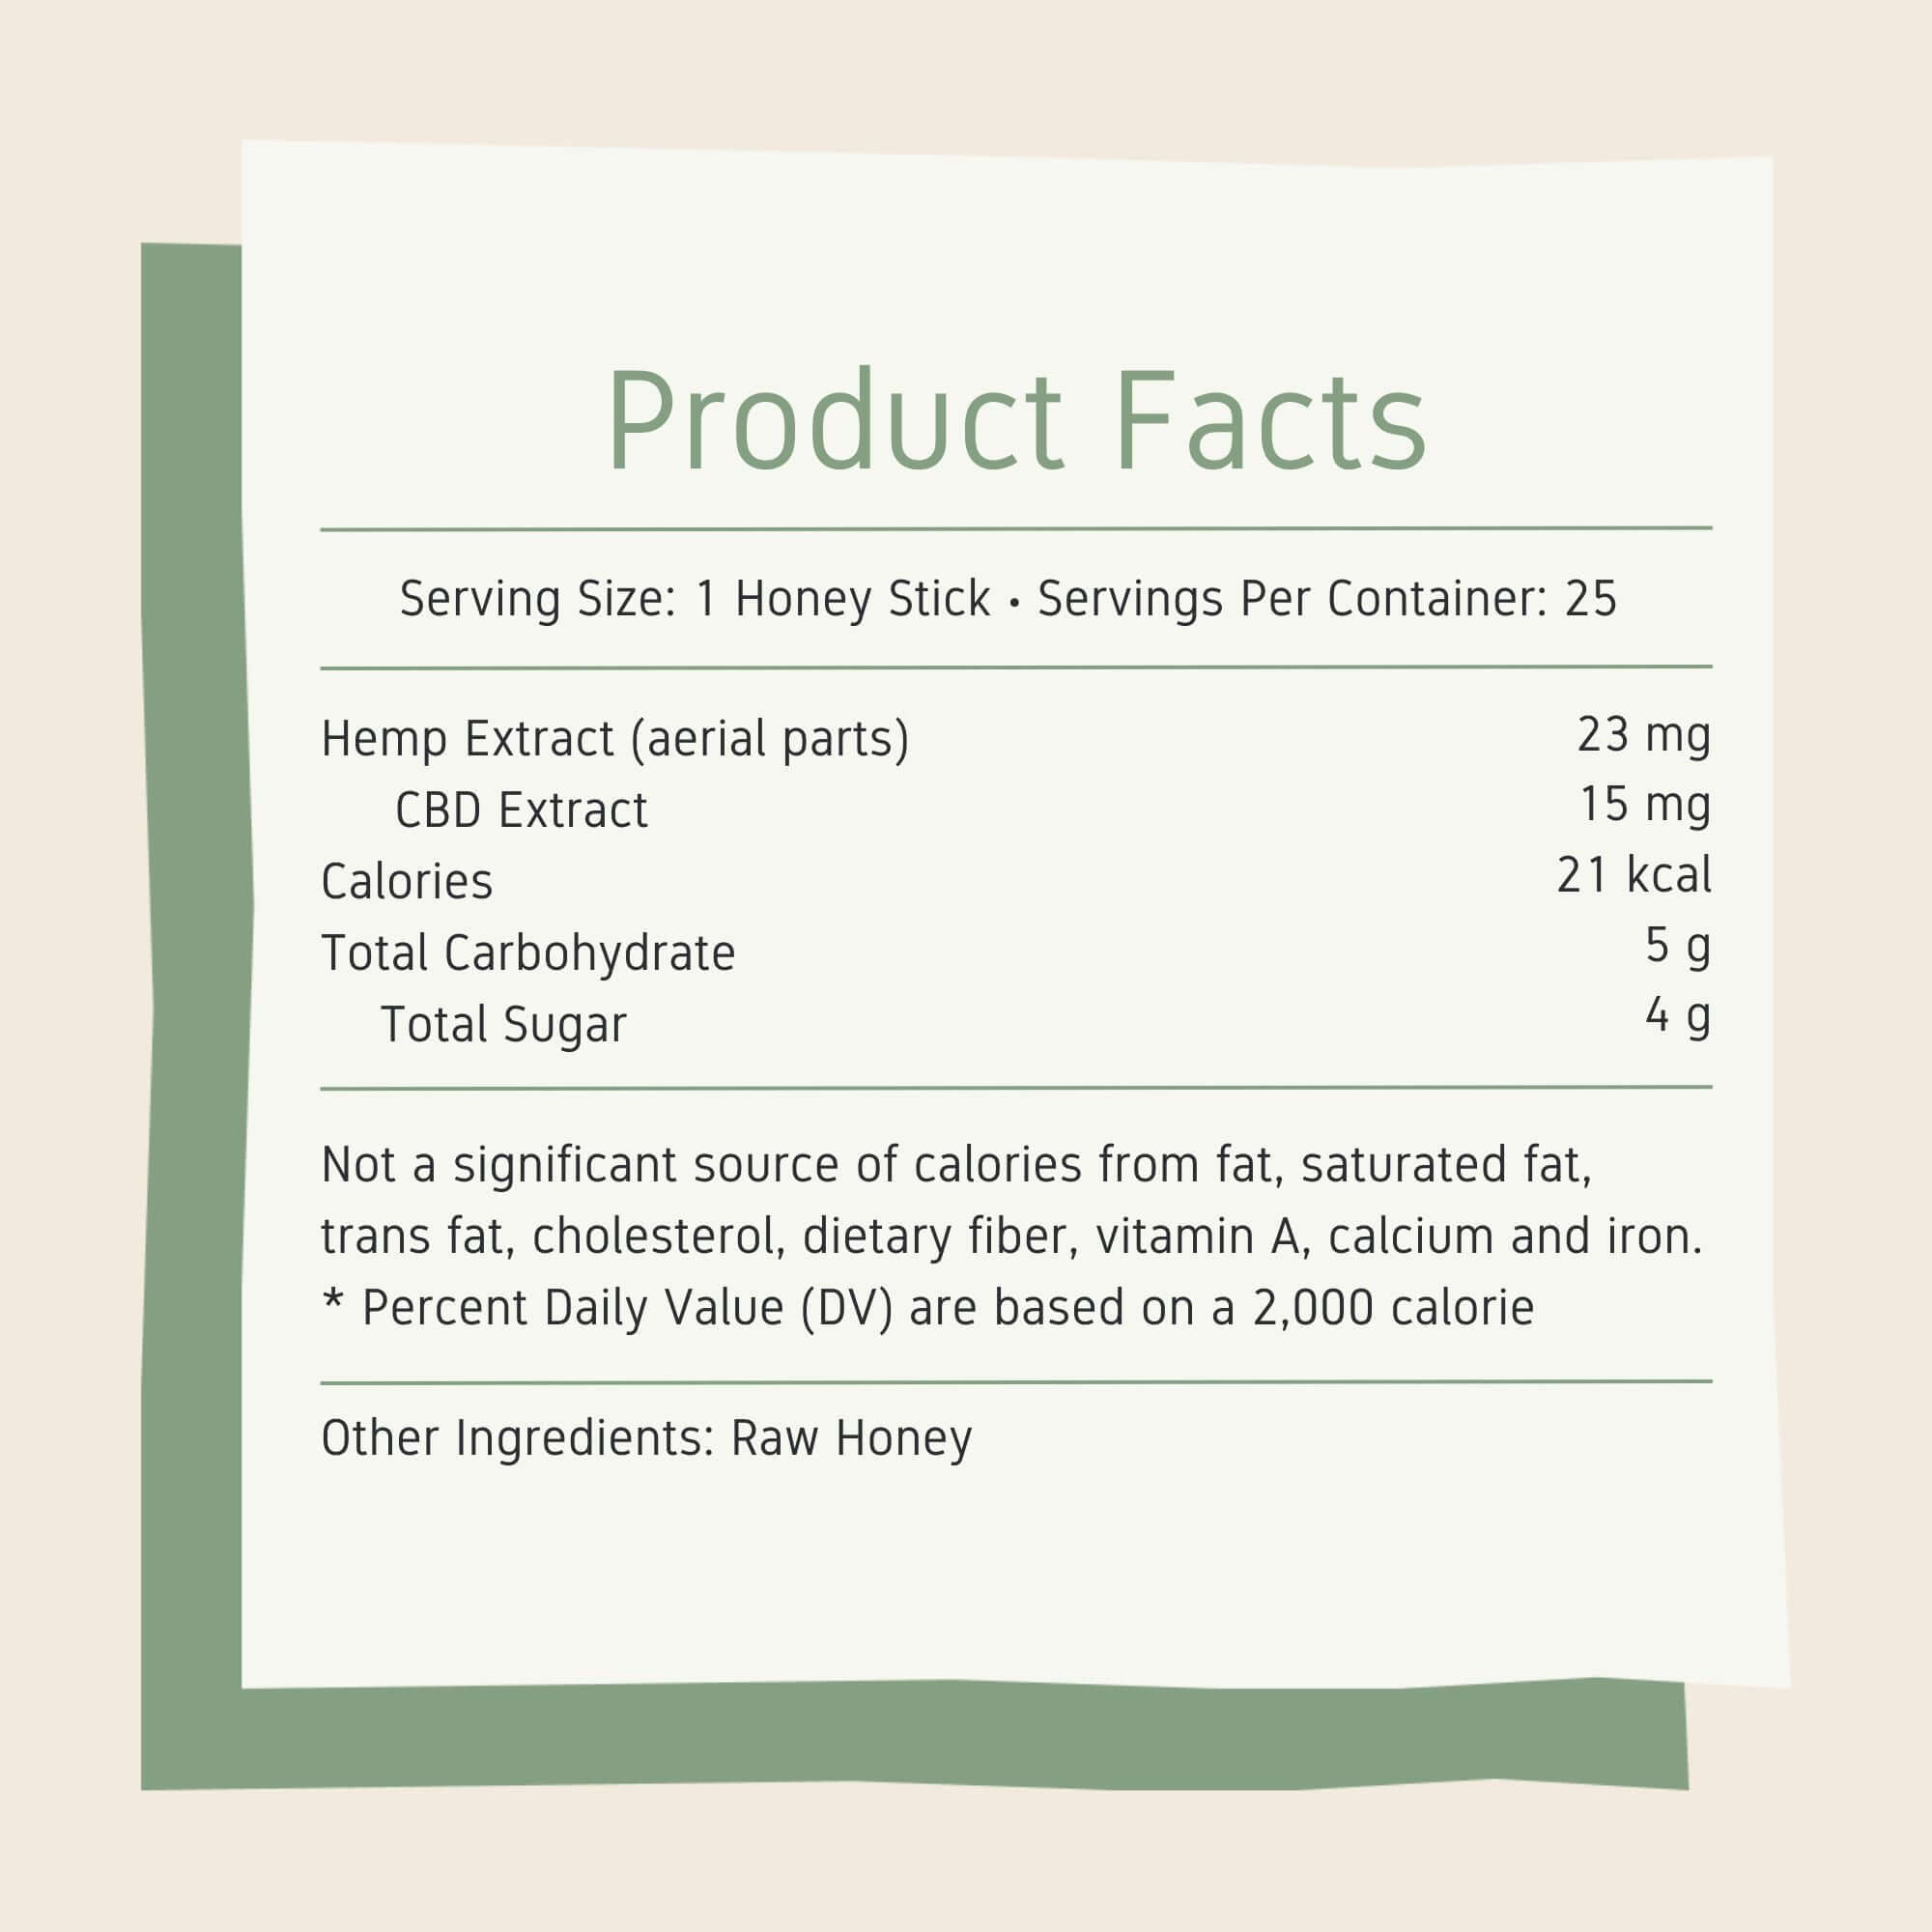 Product facts featuring serving size of 1 honey stick, 25 servings per container, and full list of ingredients